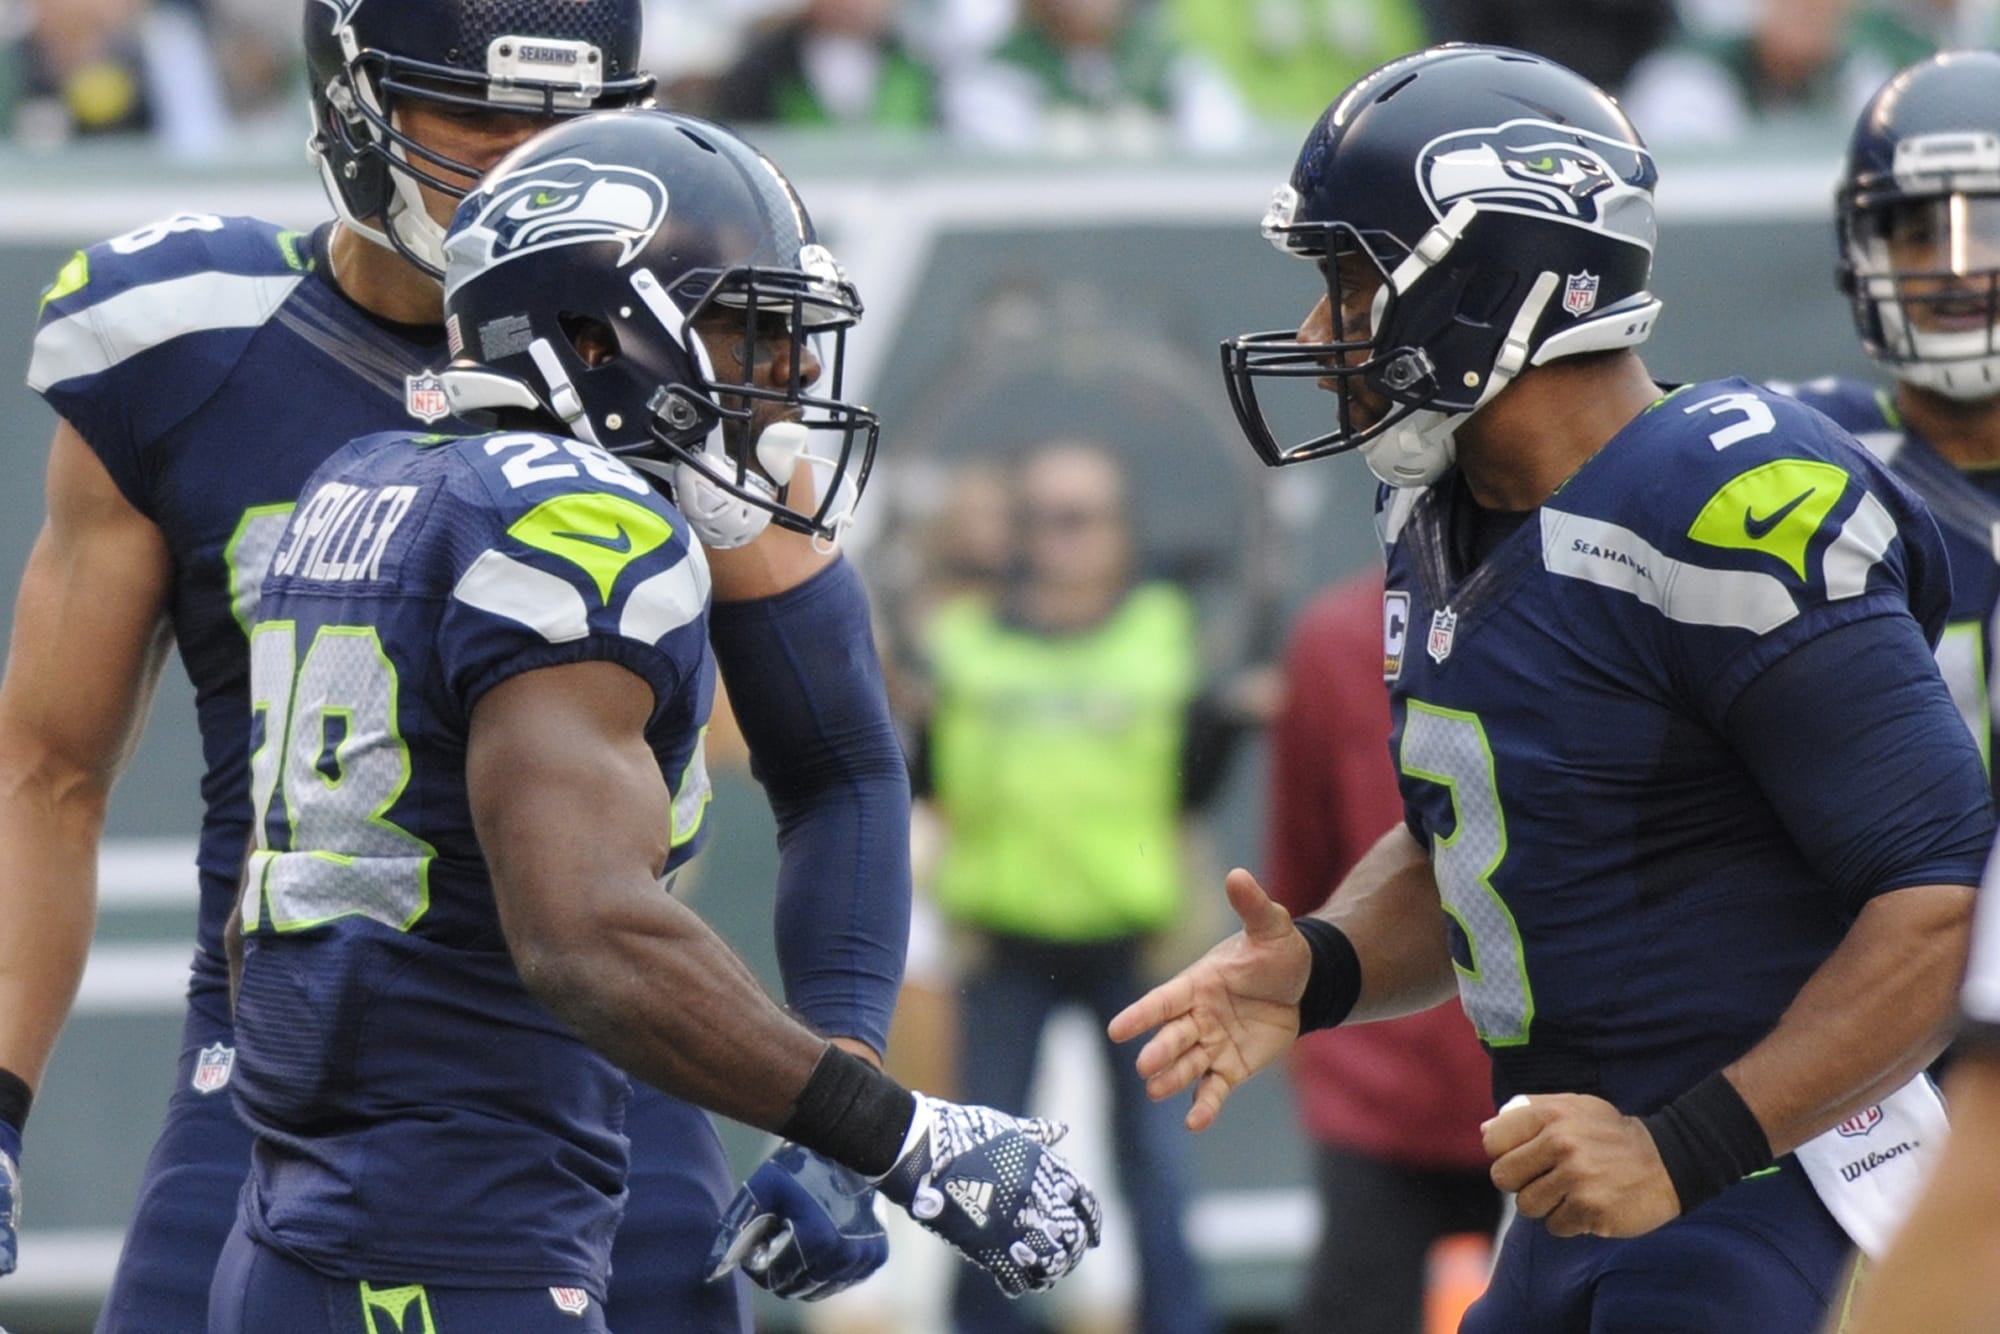 Seattle Seahawks quarterback Russell Wilson, right, celebrates with teammate C.J. Spiller, left, after they connected for a touchdown during the first half of an NFL football game against the New York Jets, Sunday, Oct. 2, 2016, in East Rutherford, N.J.